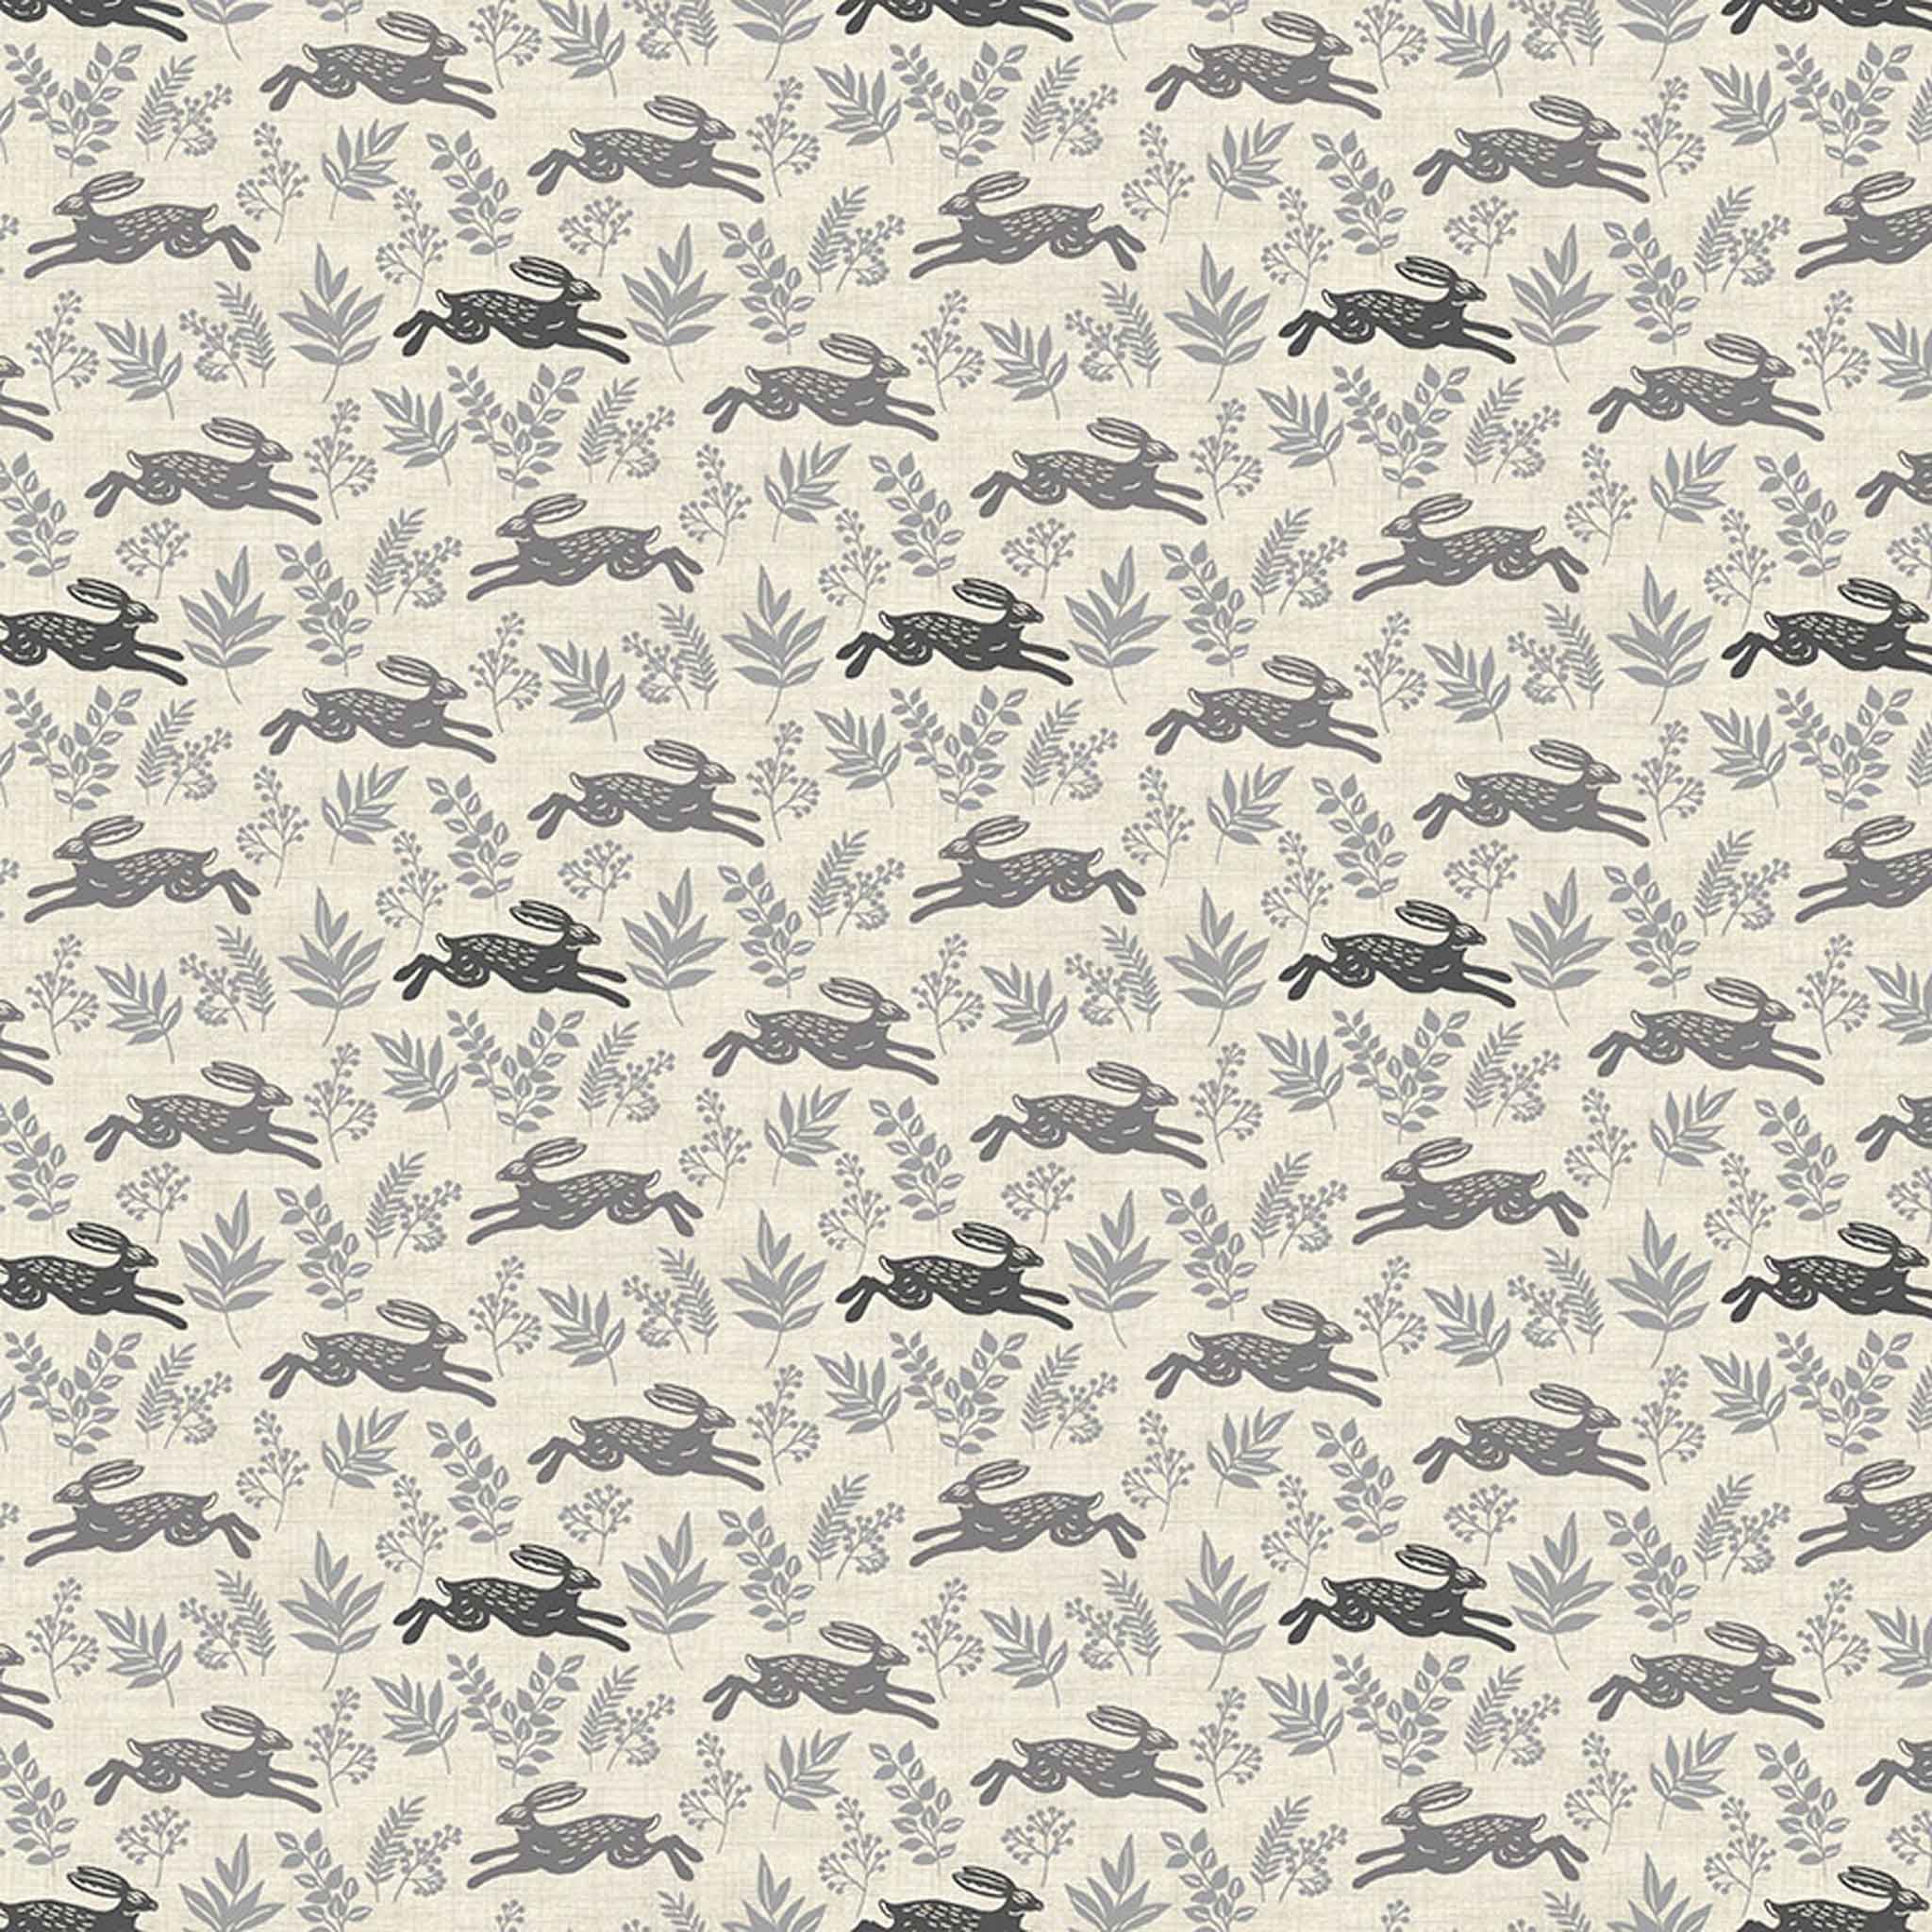 Hares Cotton Fabric Silver Grey Makower 2420/S - Hedgerow Collection